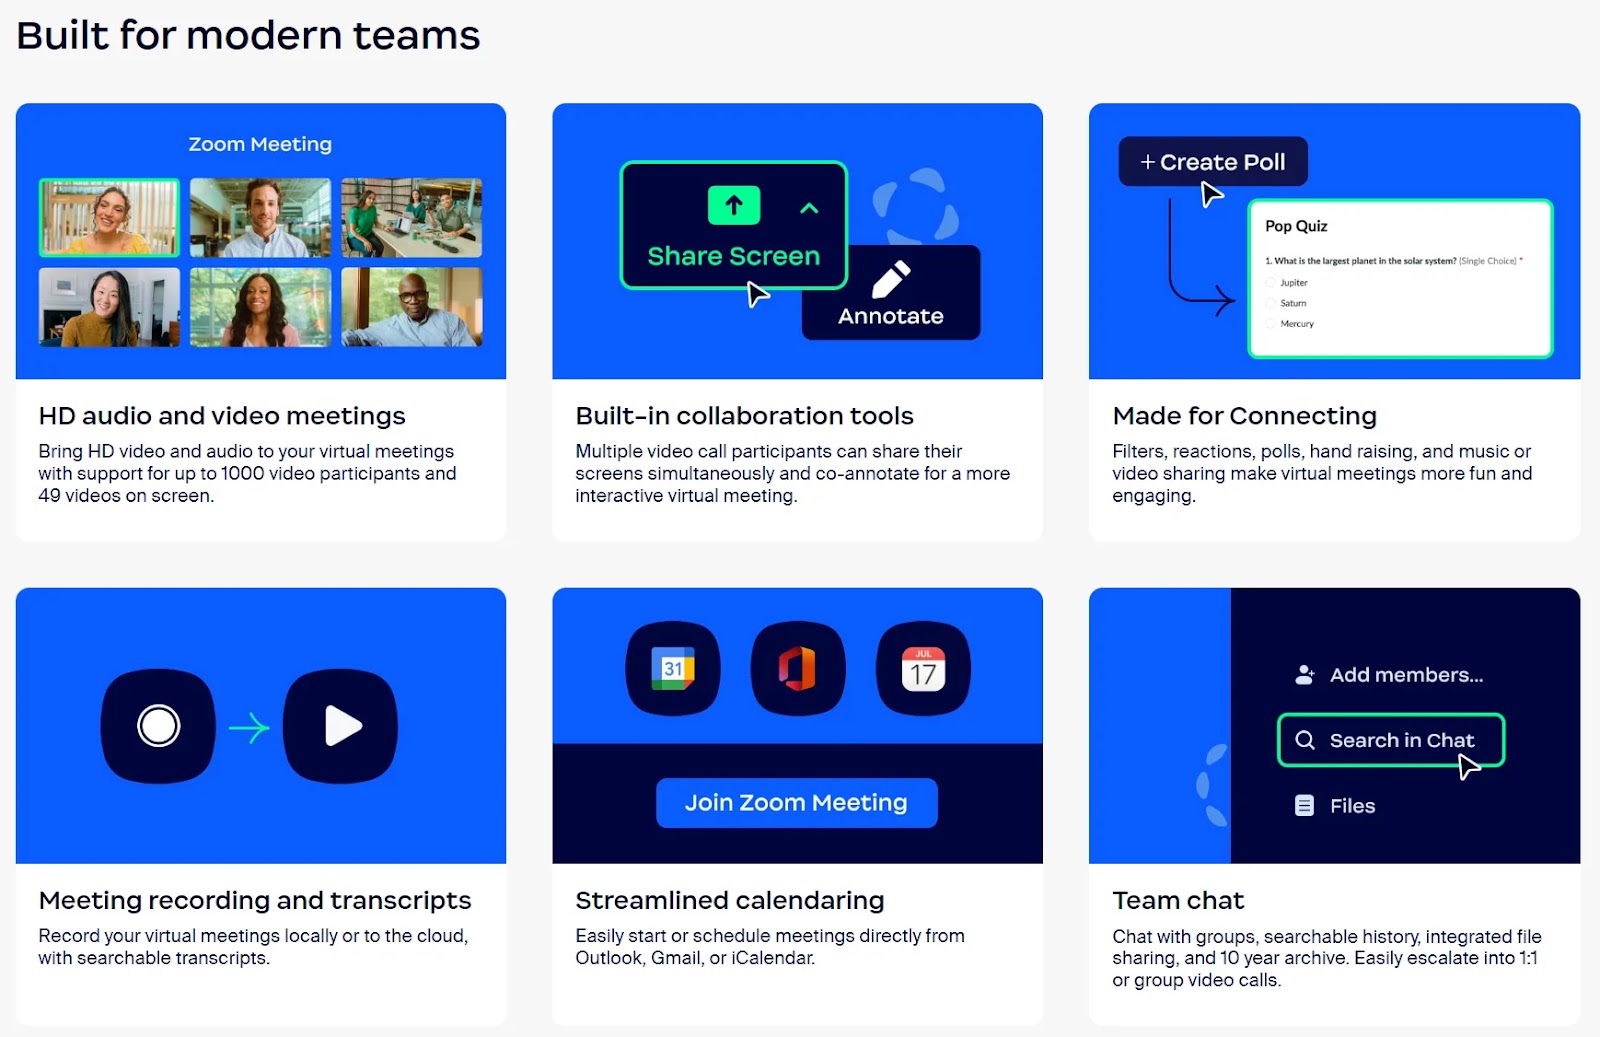 "Build for modern teams" section of the Zoom Meetings' landing page